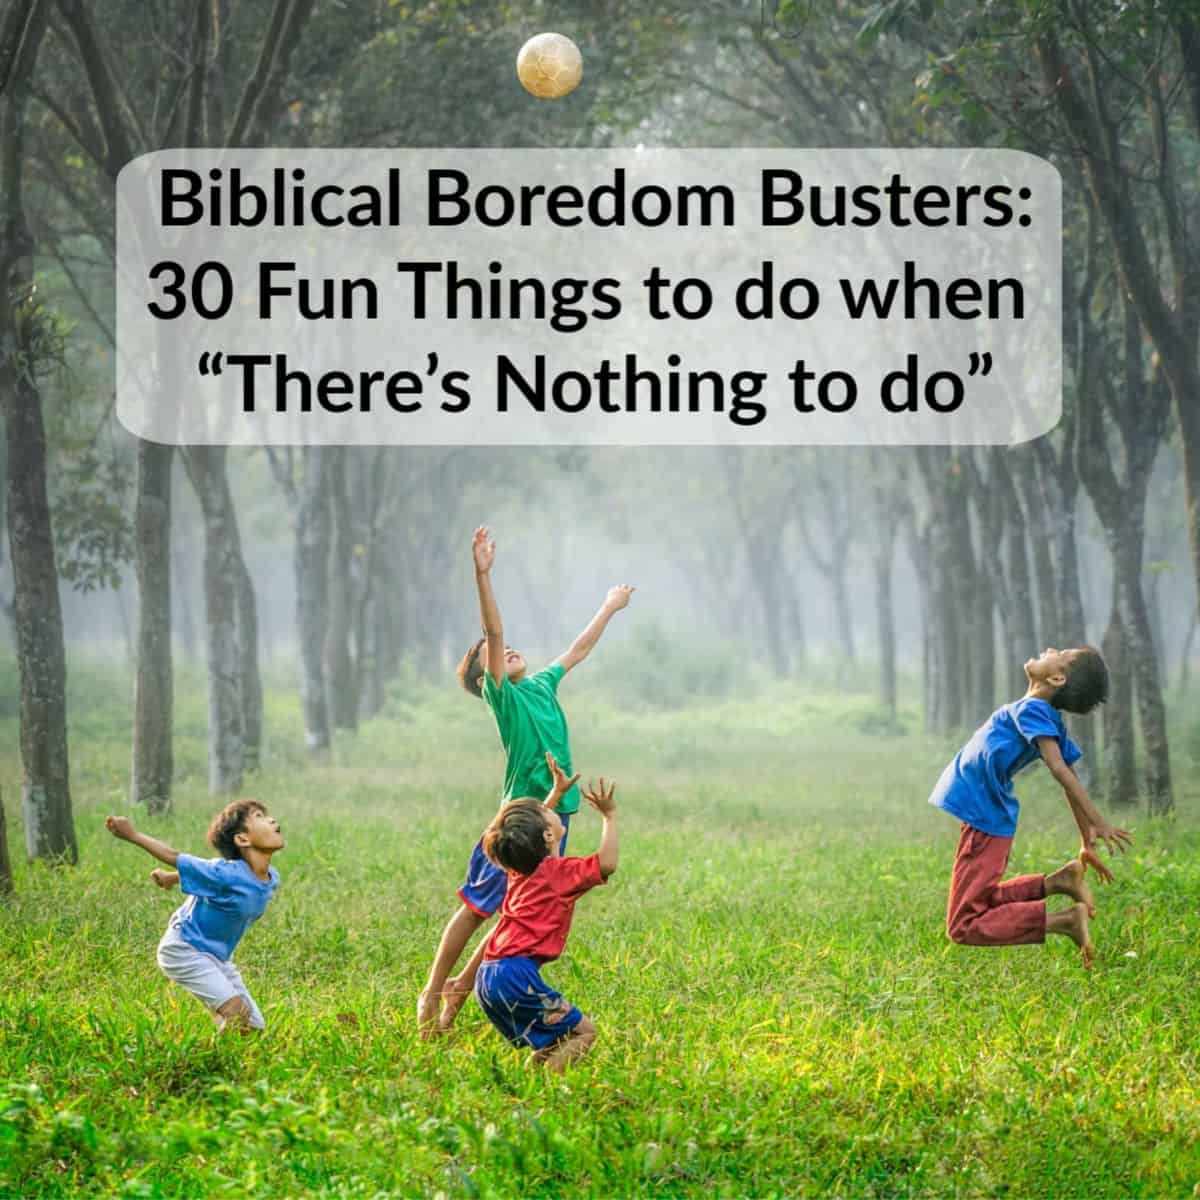 Biblical Boredom Busters: 30 Fun Bible Activities for Kids when “There’s Nothing to do”